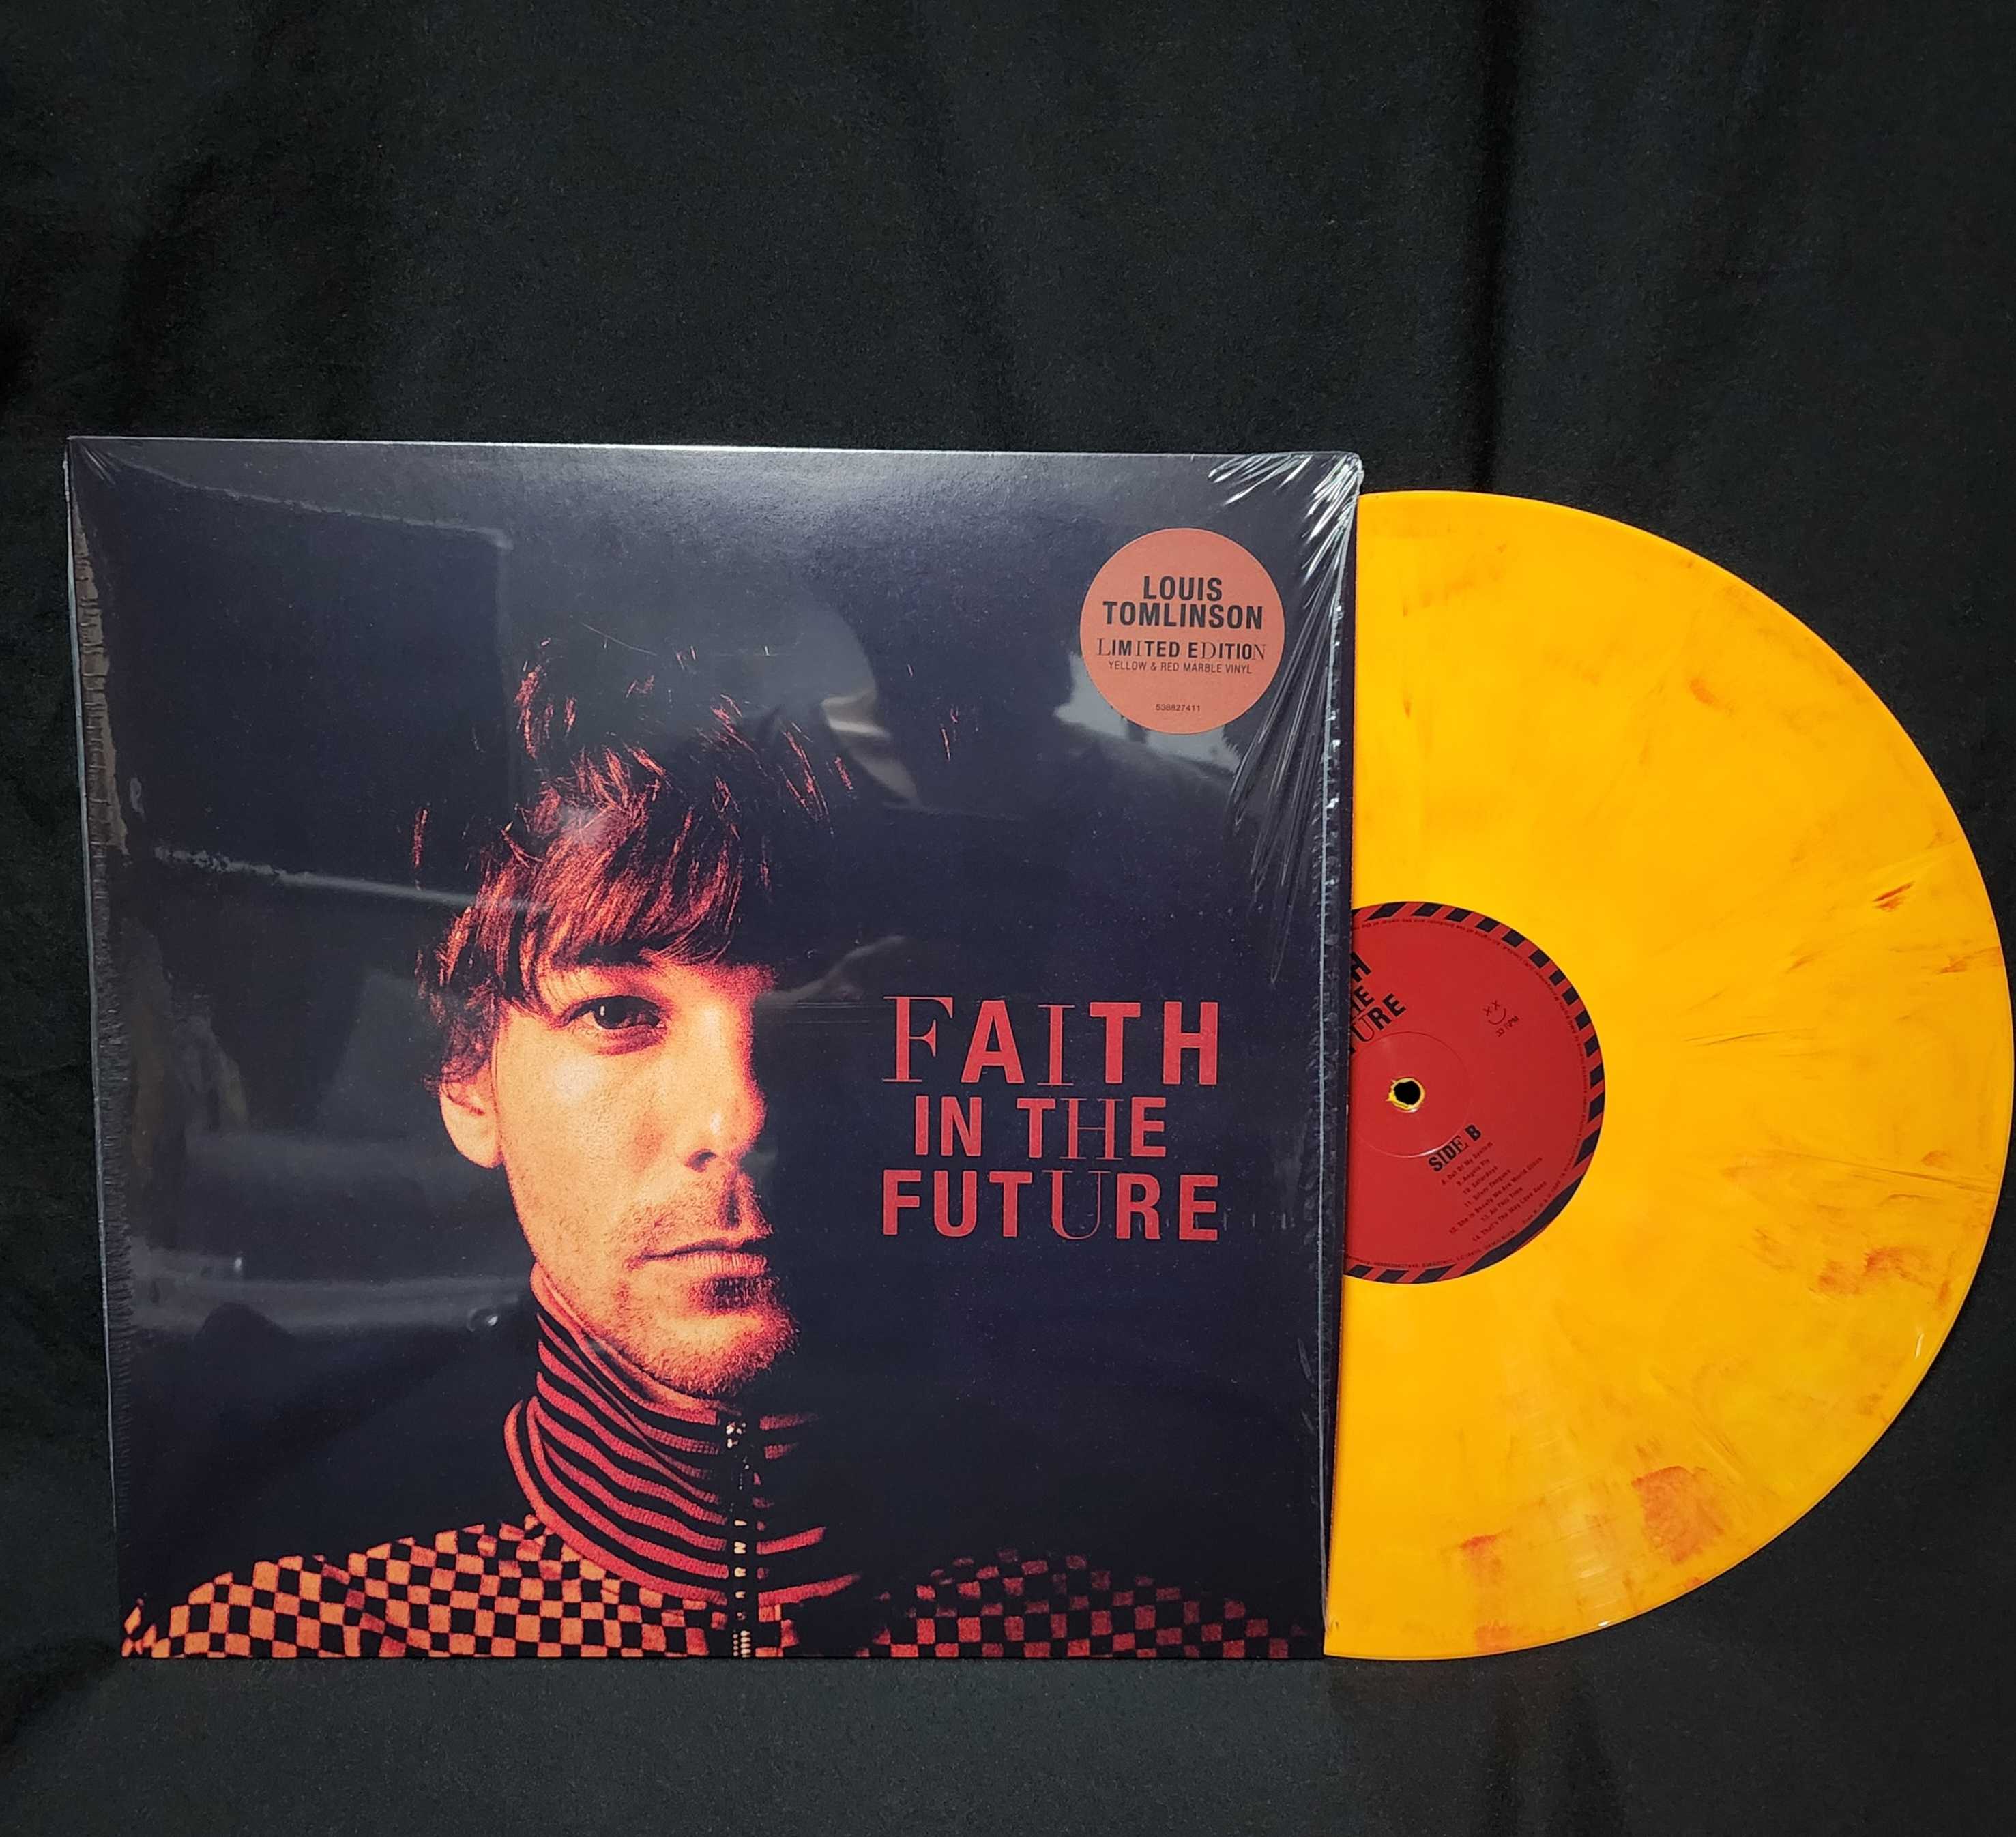 Louis Tomlinson - Faith in the Future (LP) Limited Edition Picture Disc  Vinyl